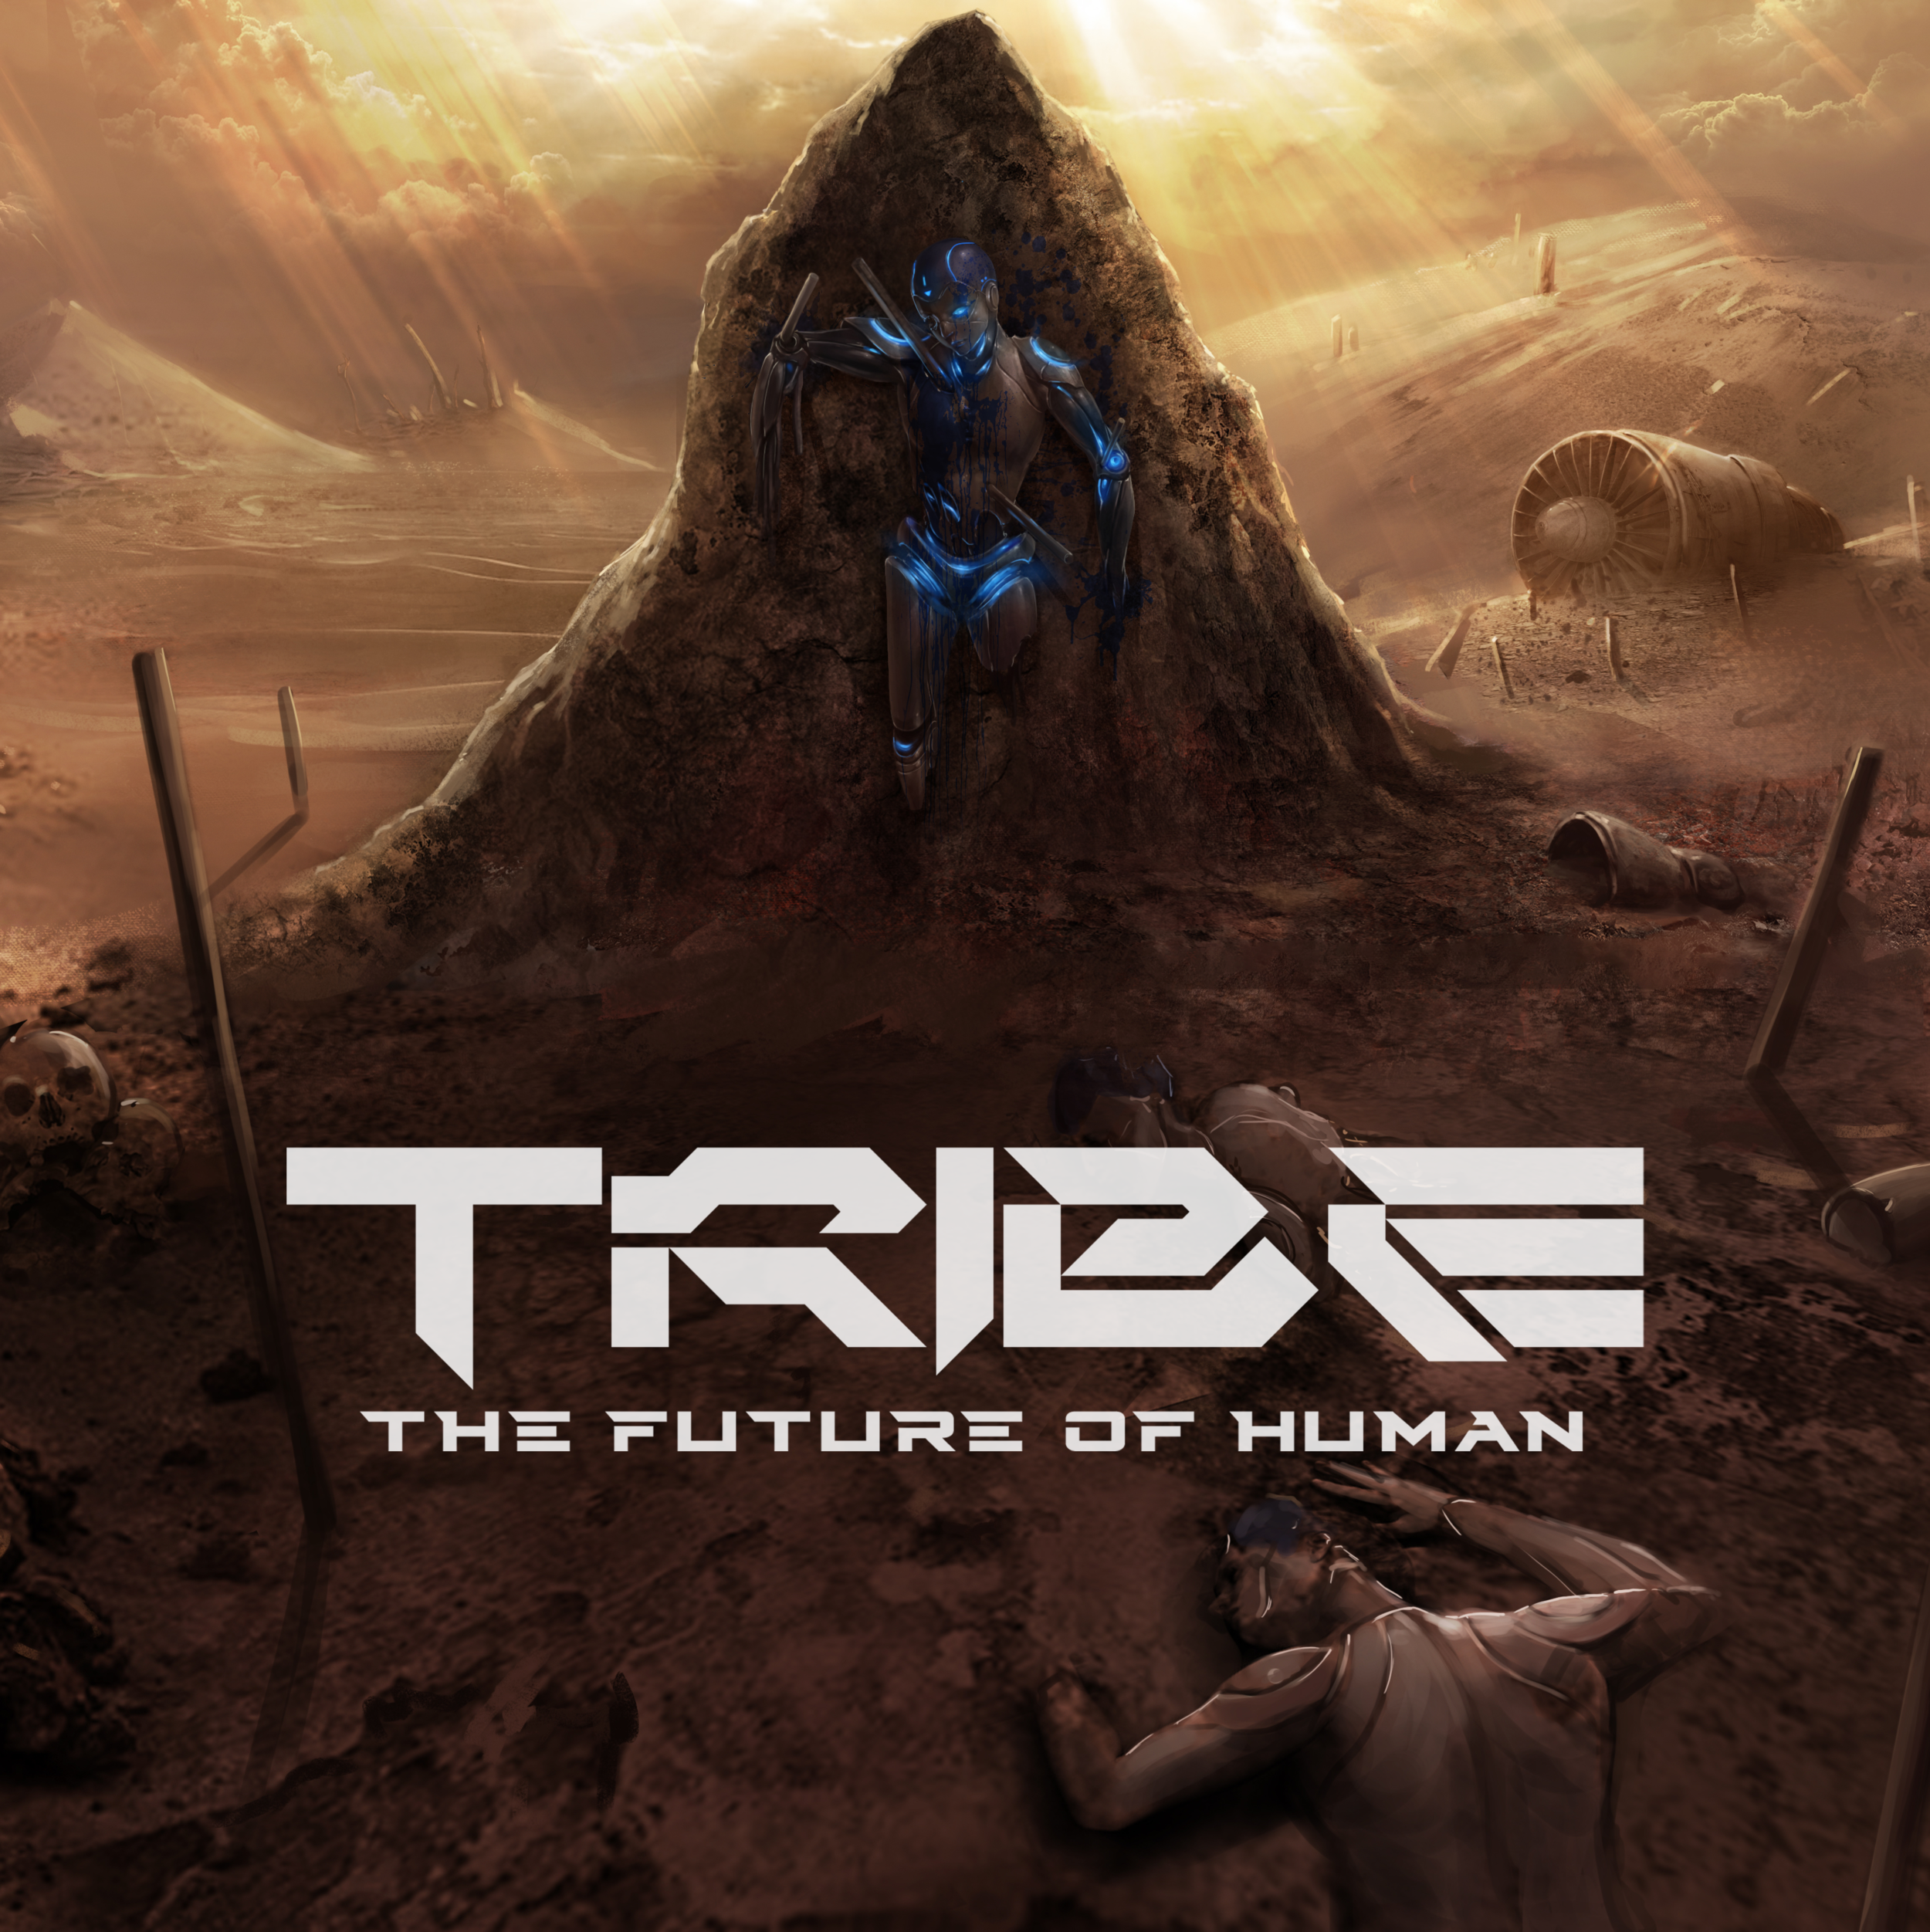  TRIBE The future of human